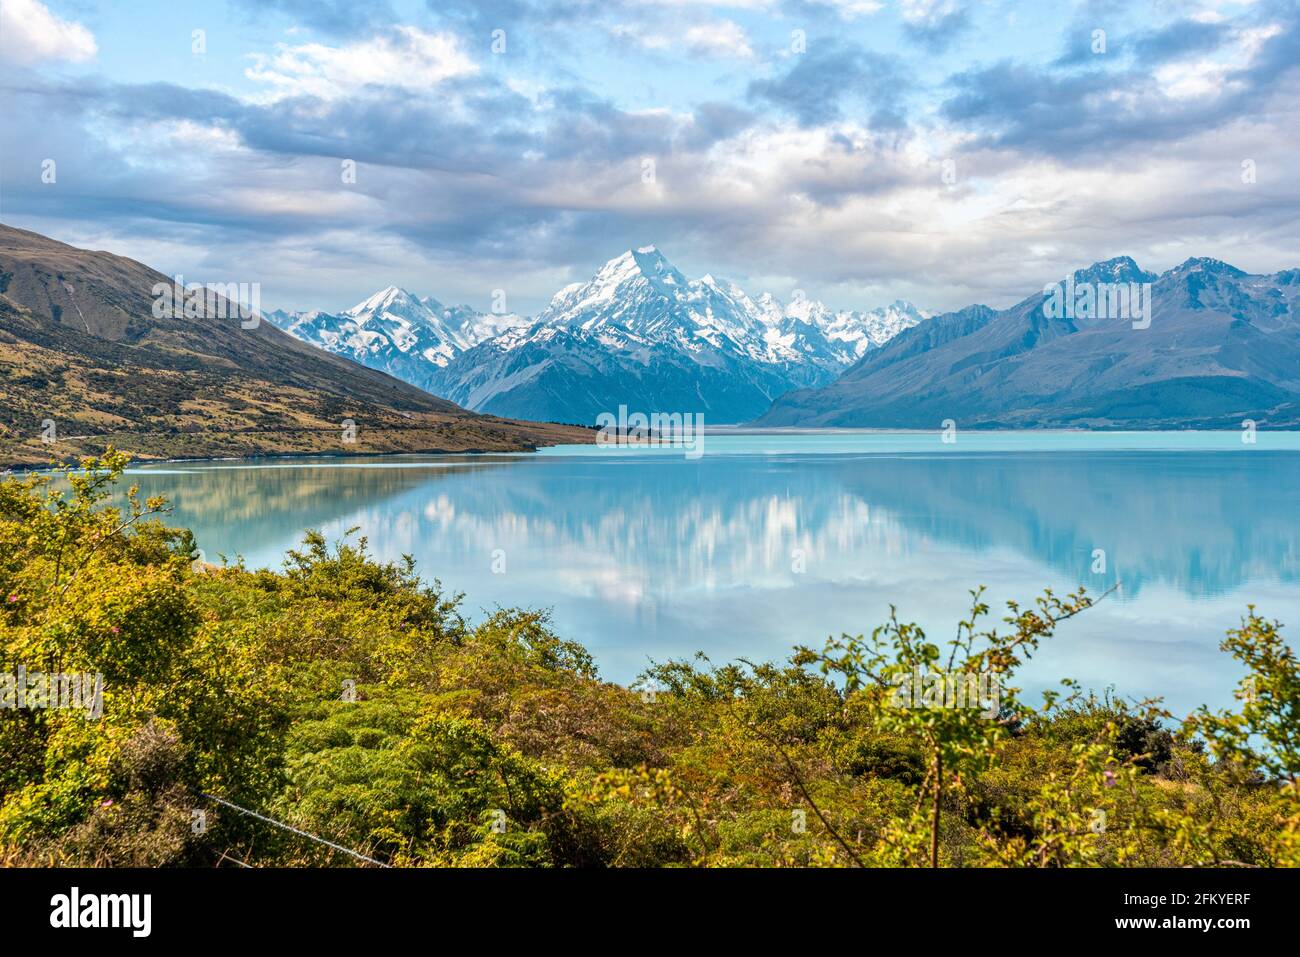 Scenic reflection of Mount Sefton and Mount Cook at lake Pukaki, South Island of New Zealand Stock Photo